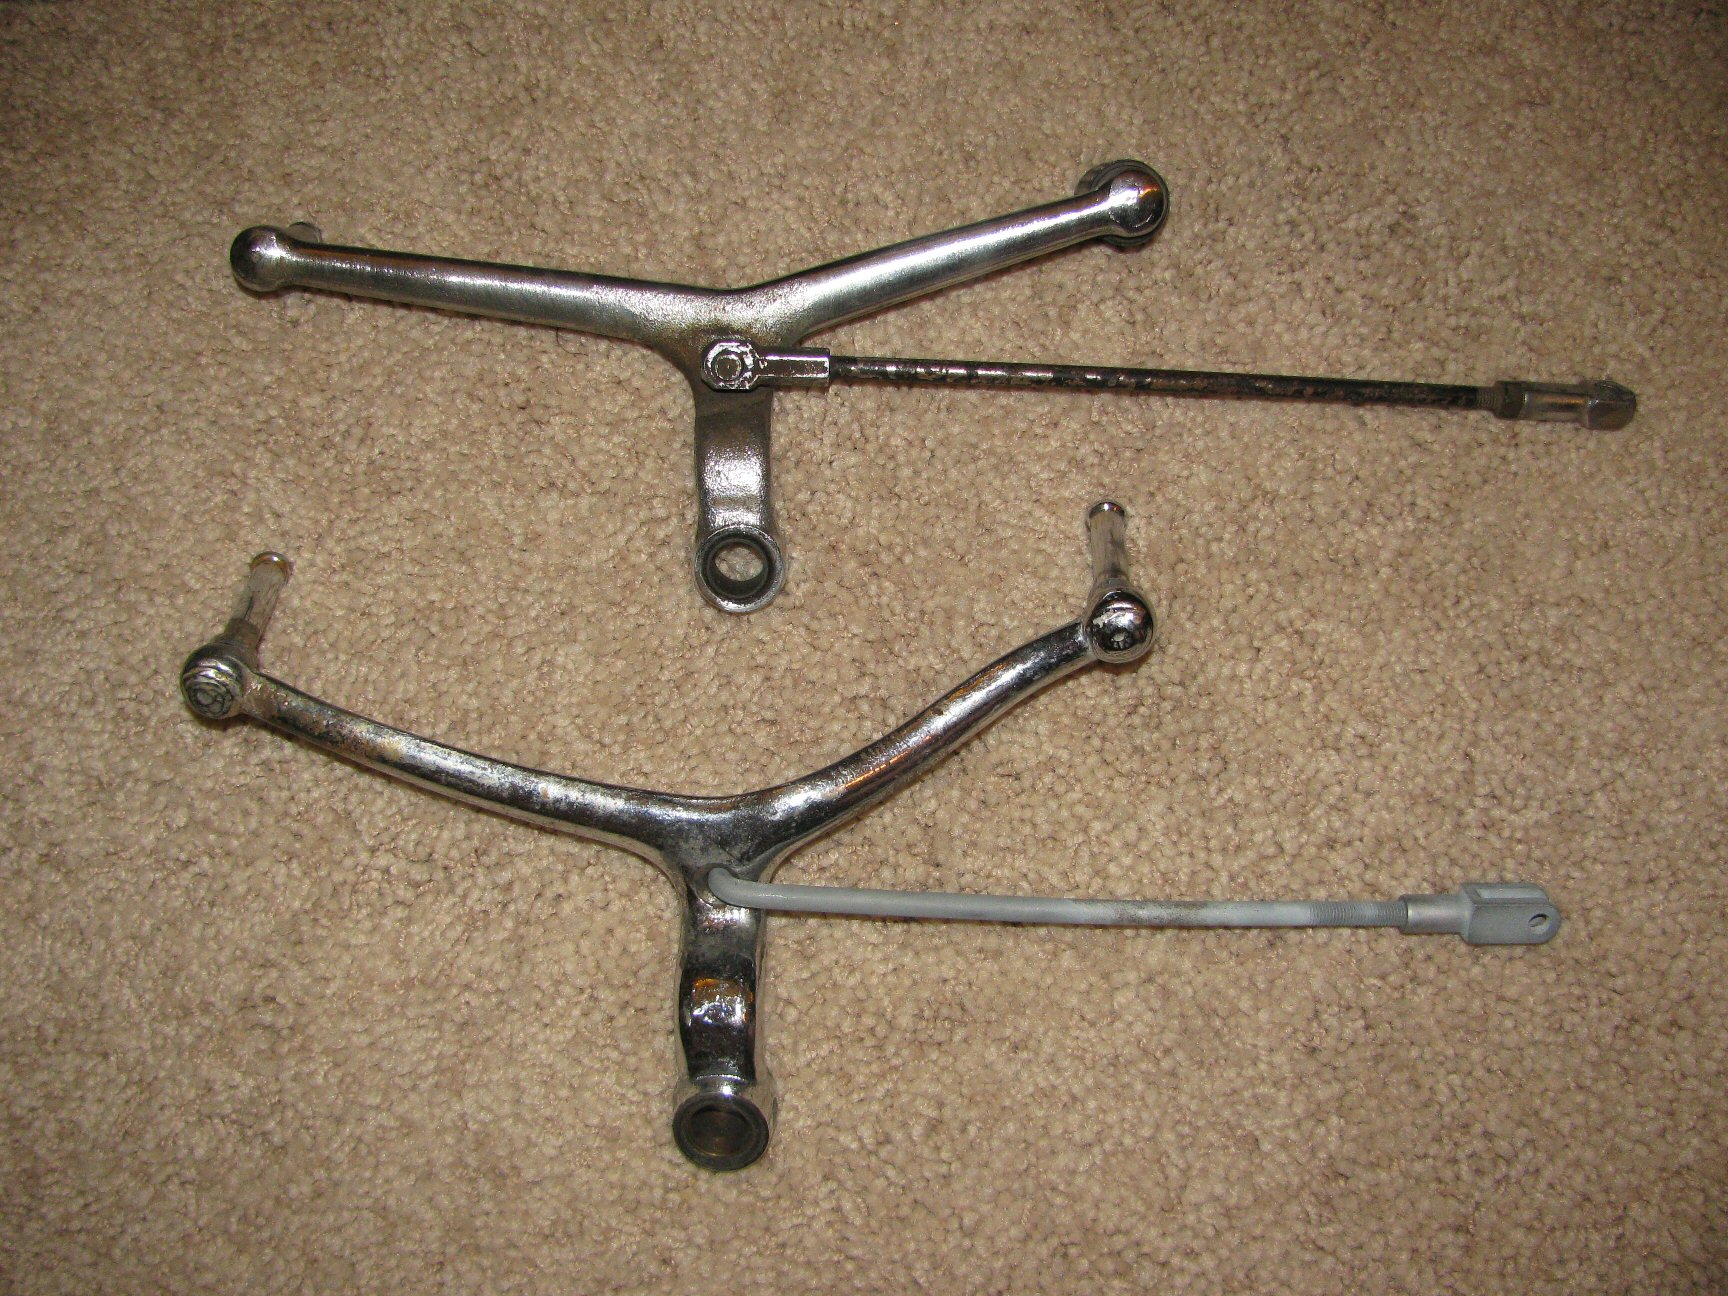 Inside view of both shift lever styles. Top shift lever is a later Tonti framed model. Bottom shift lever is from a loop frame.